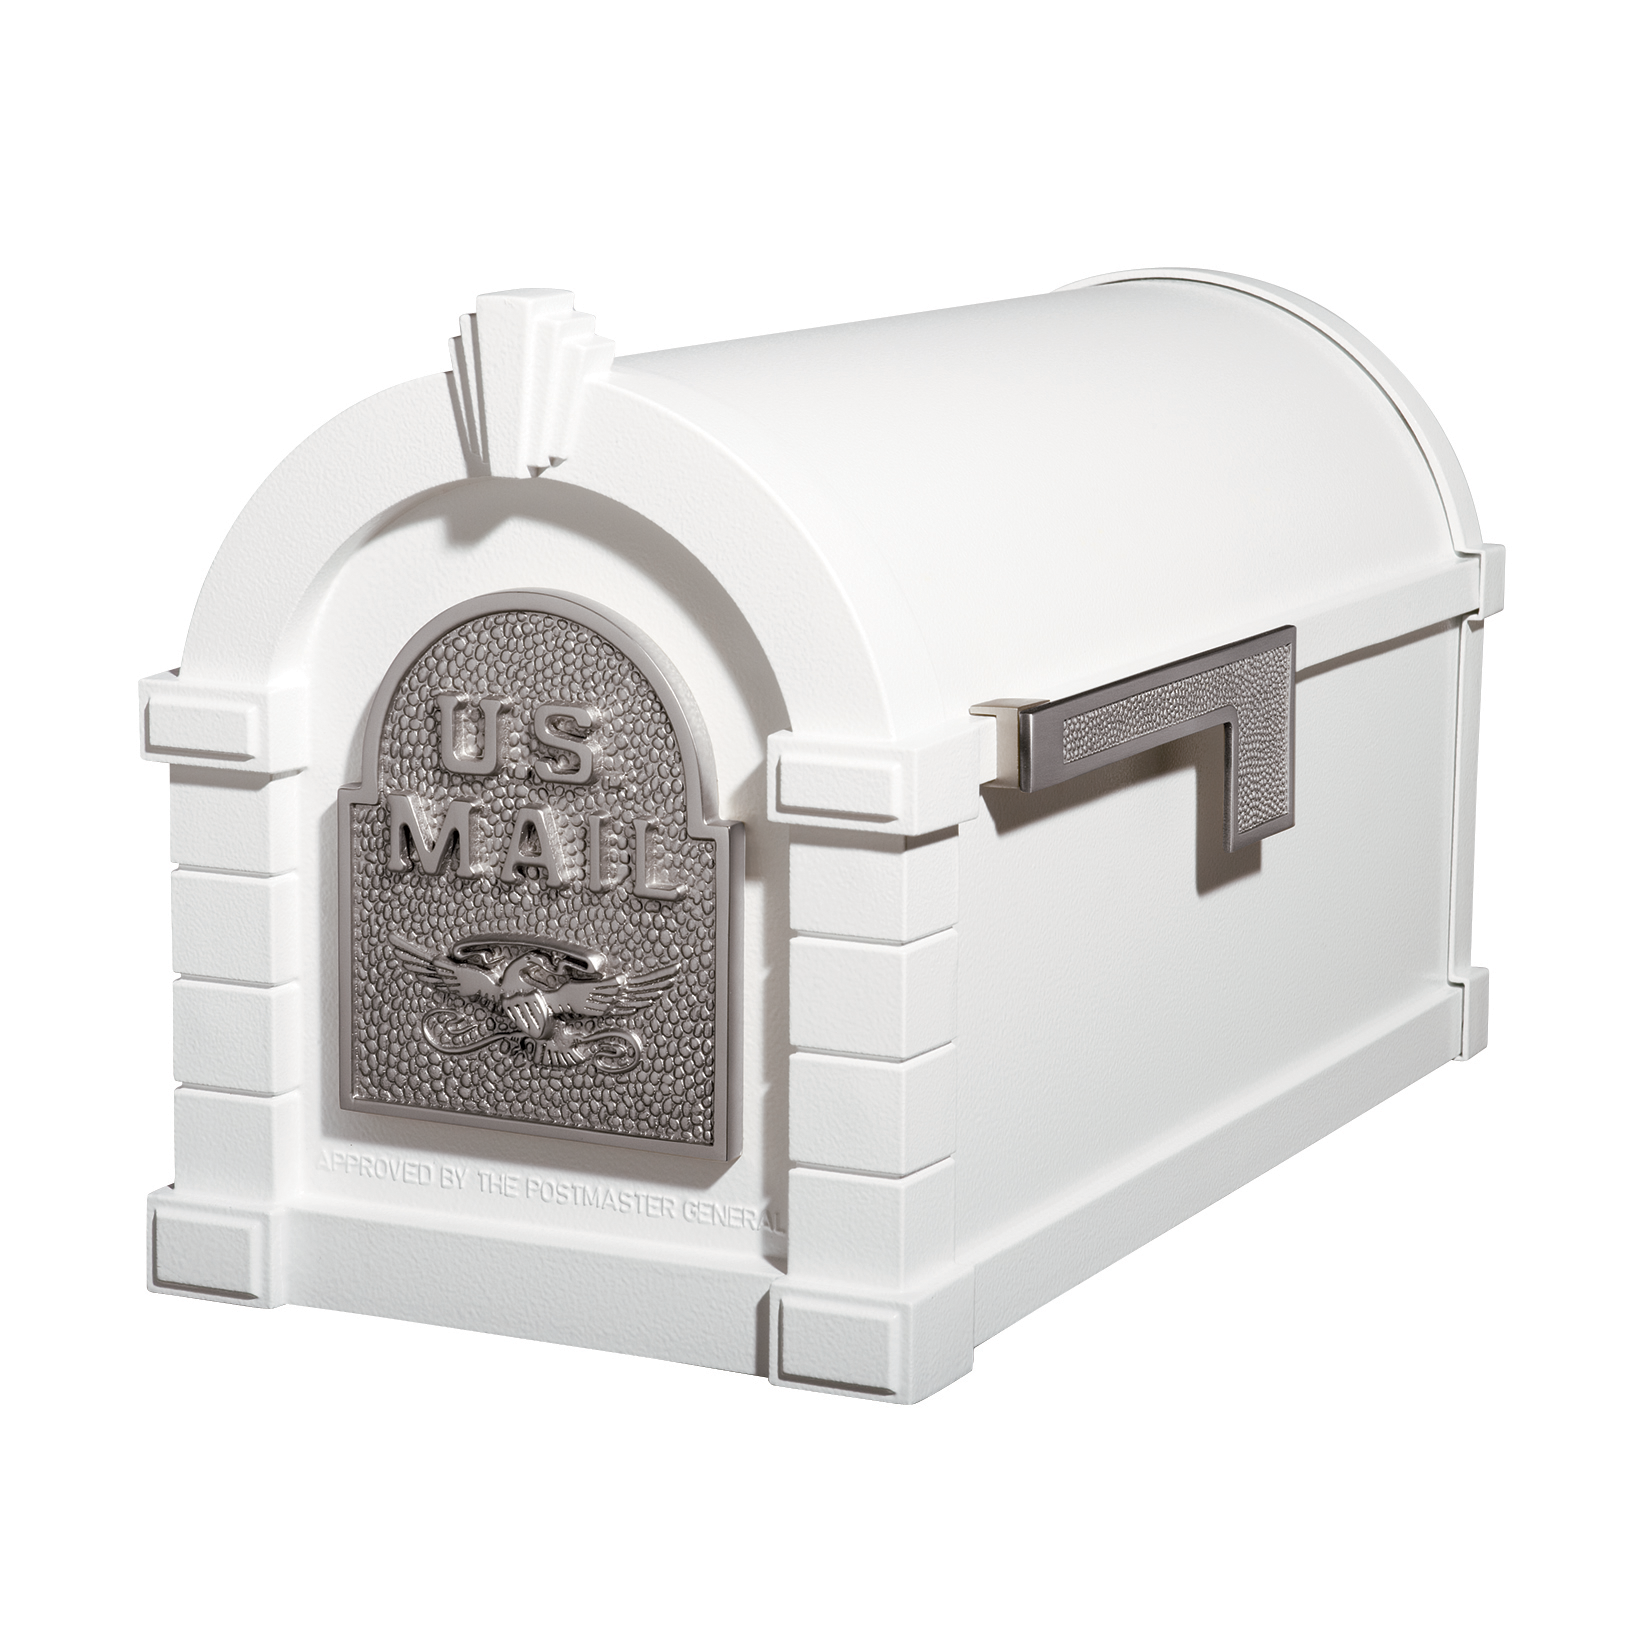 Gaines Eagle Keystone Mailboxes<br >White with Satin Nickel